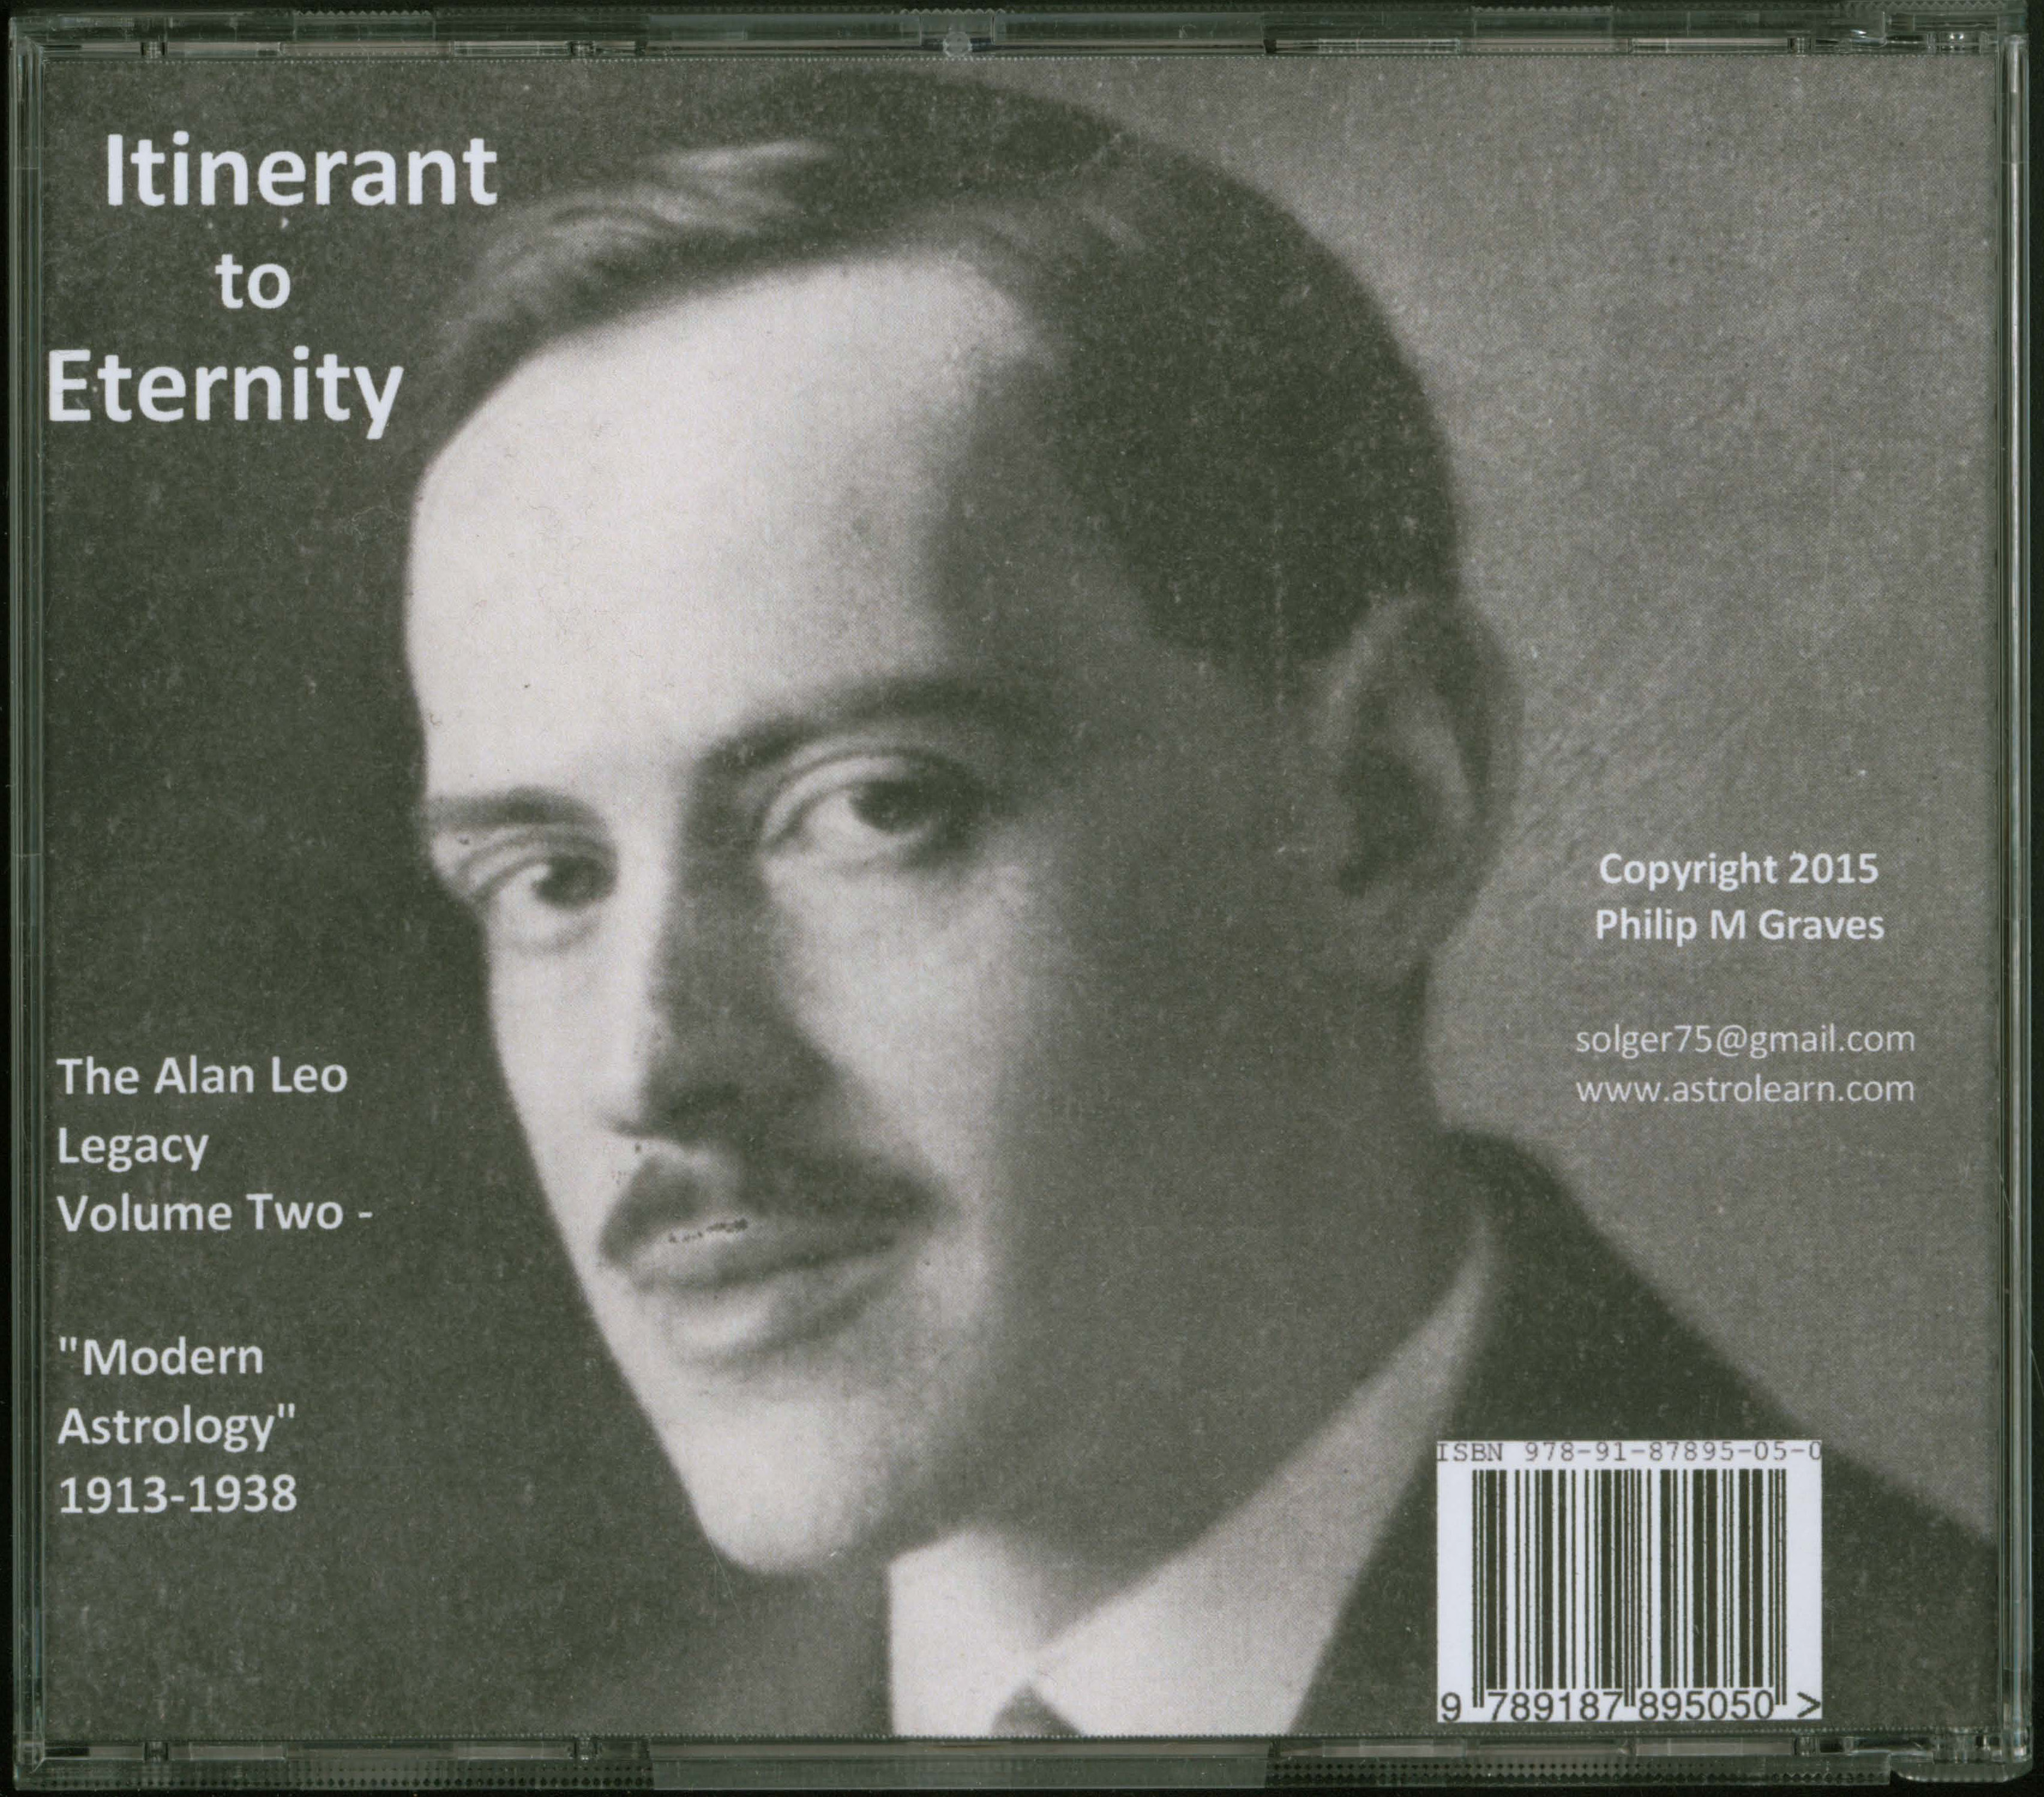 Itinerant to Eternity: the Alan Leo Legacy Volume Two - "Modern Astrology", 1913-1938, DVD, Rear Cover